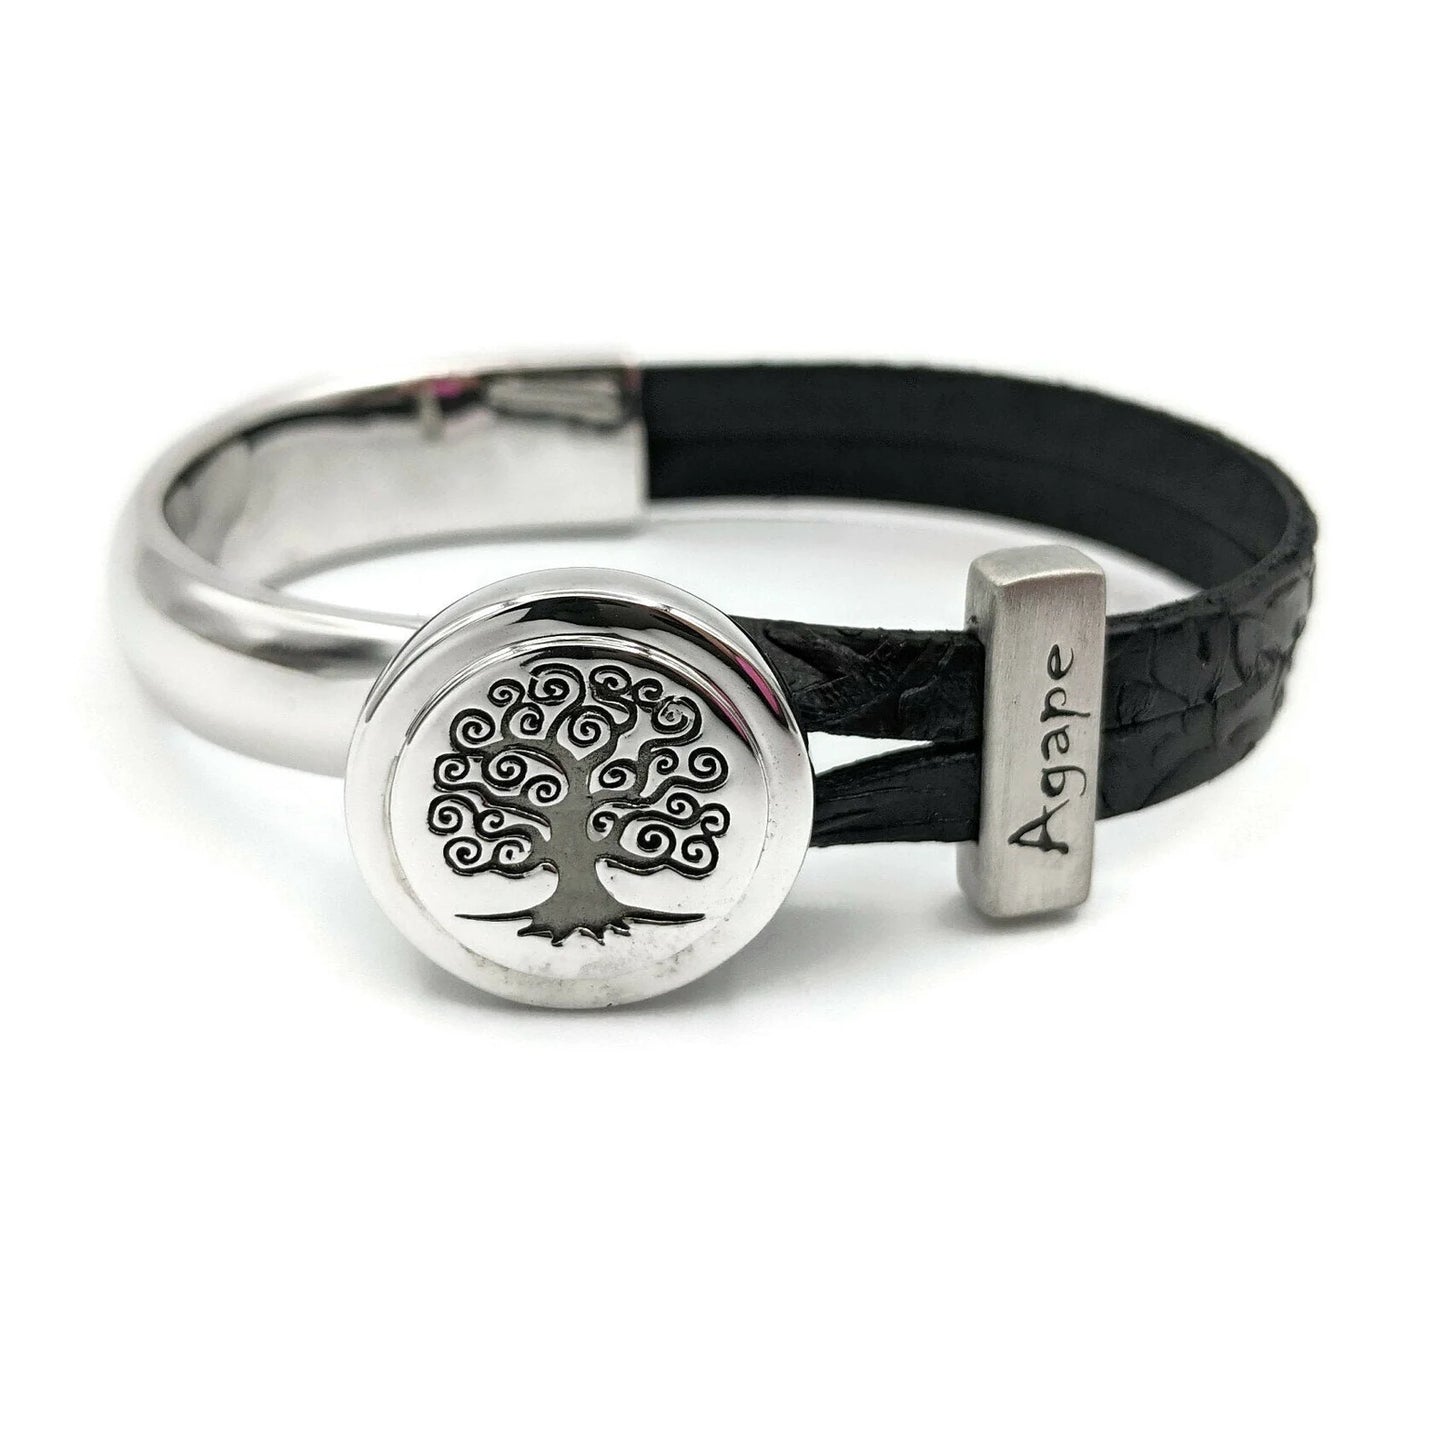 Agape Leather Bracelet with Tree of Life Half Cuff